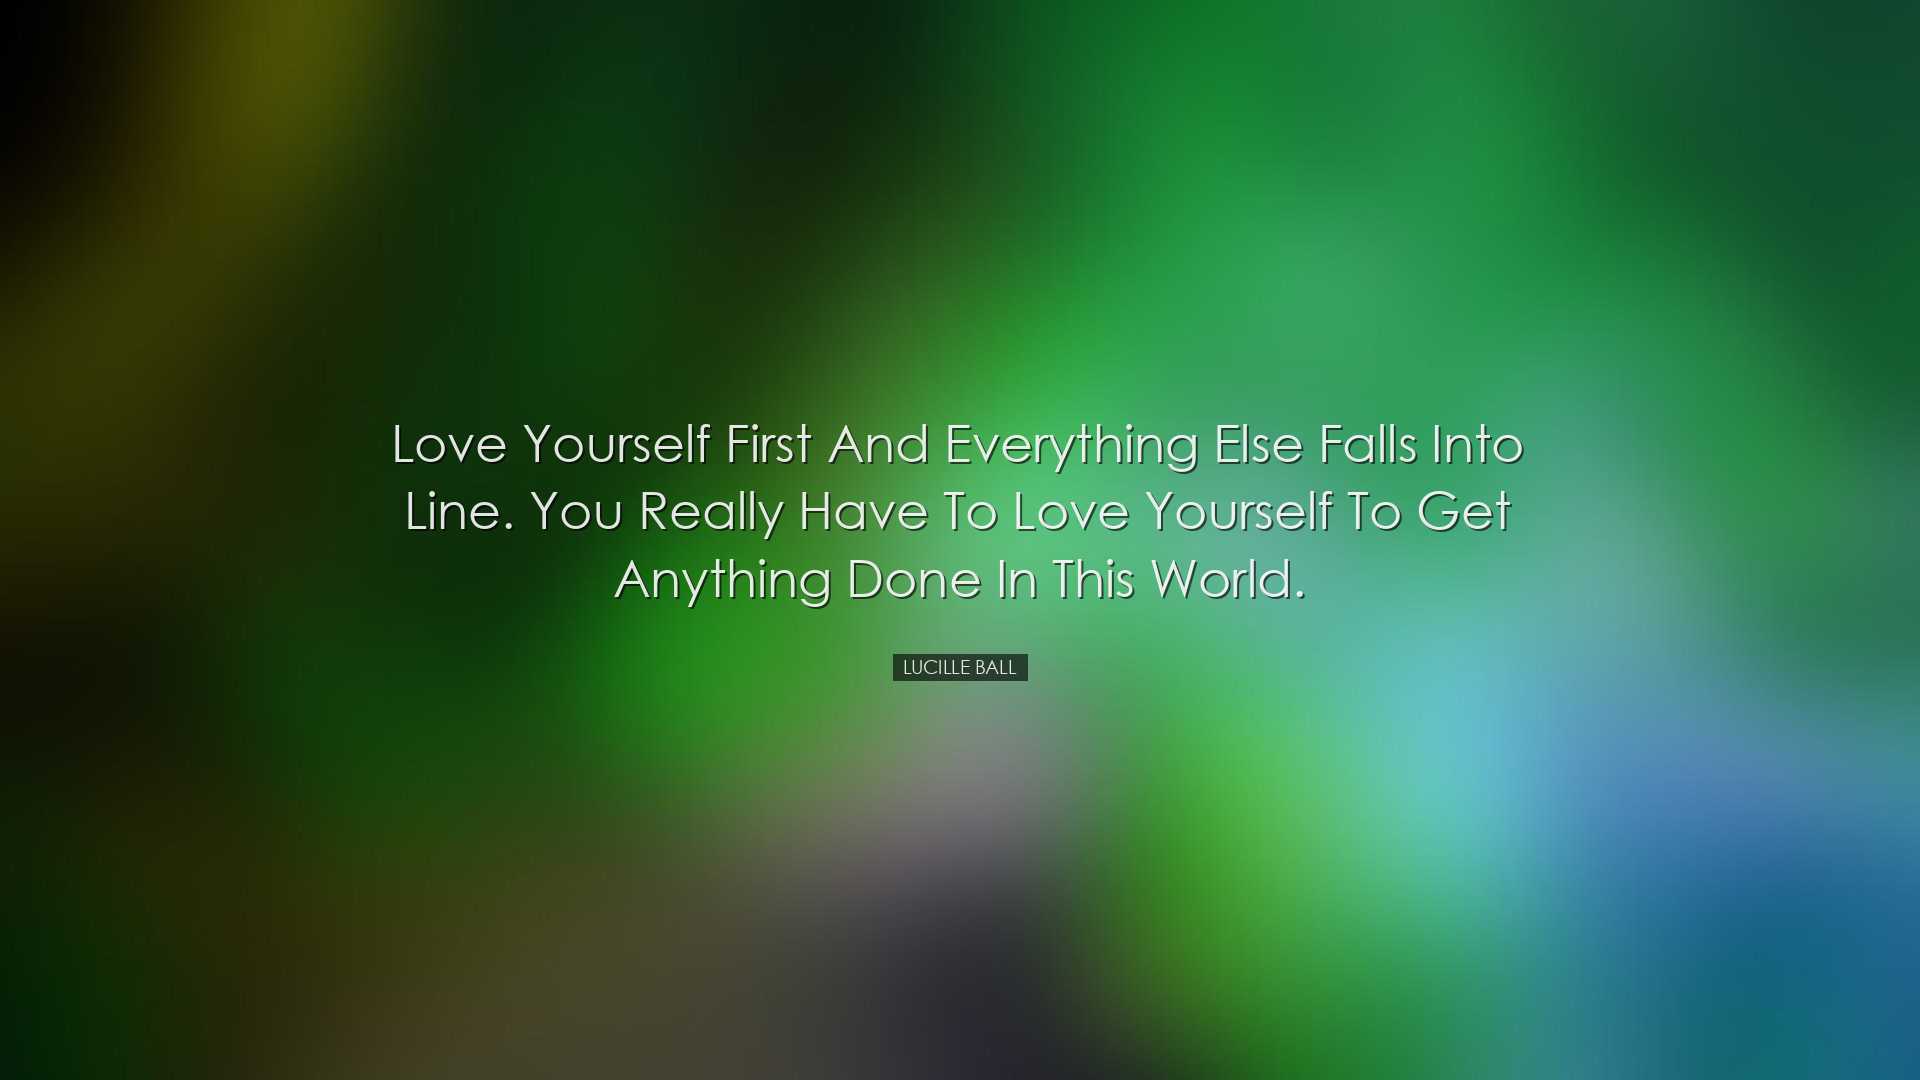 Love yourself first and everything else falls into line. You reall